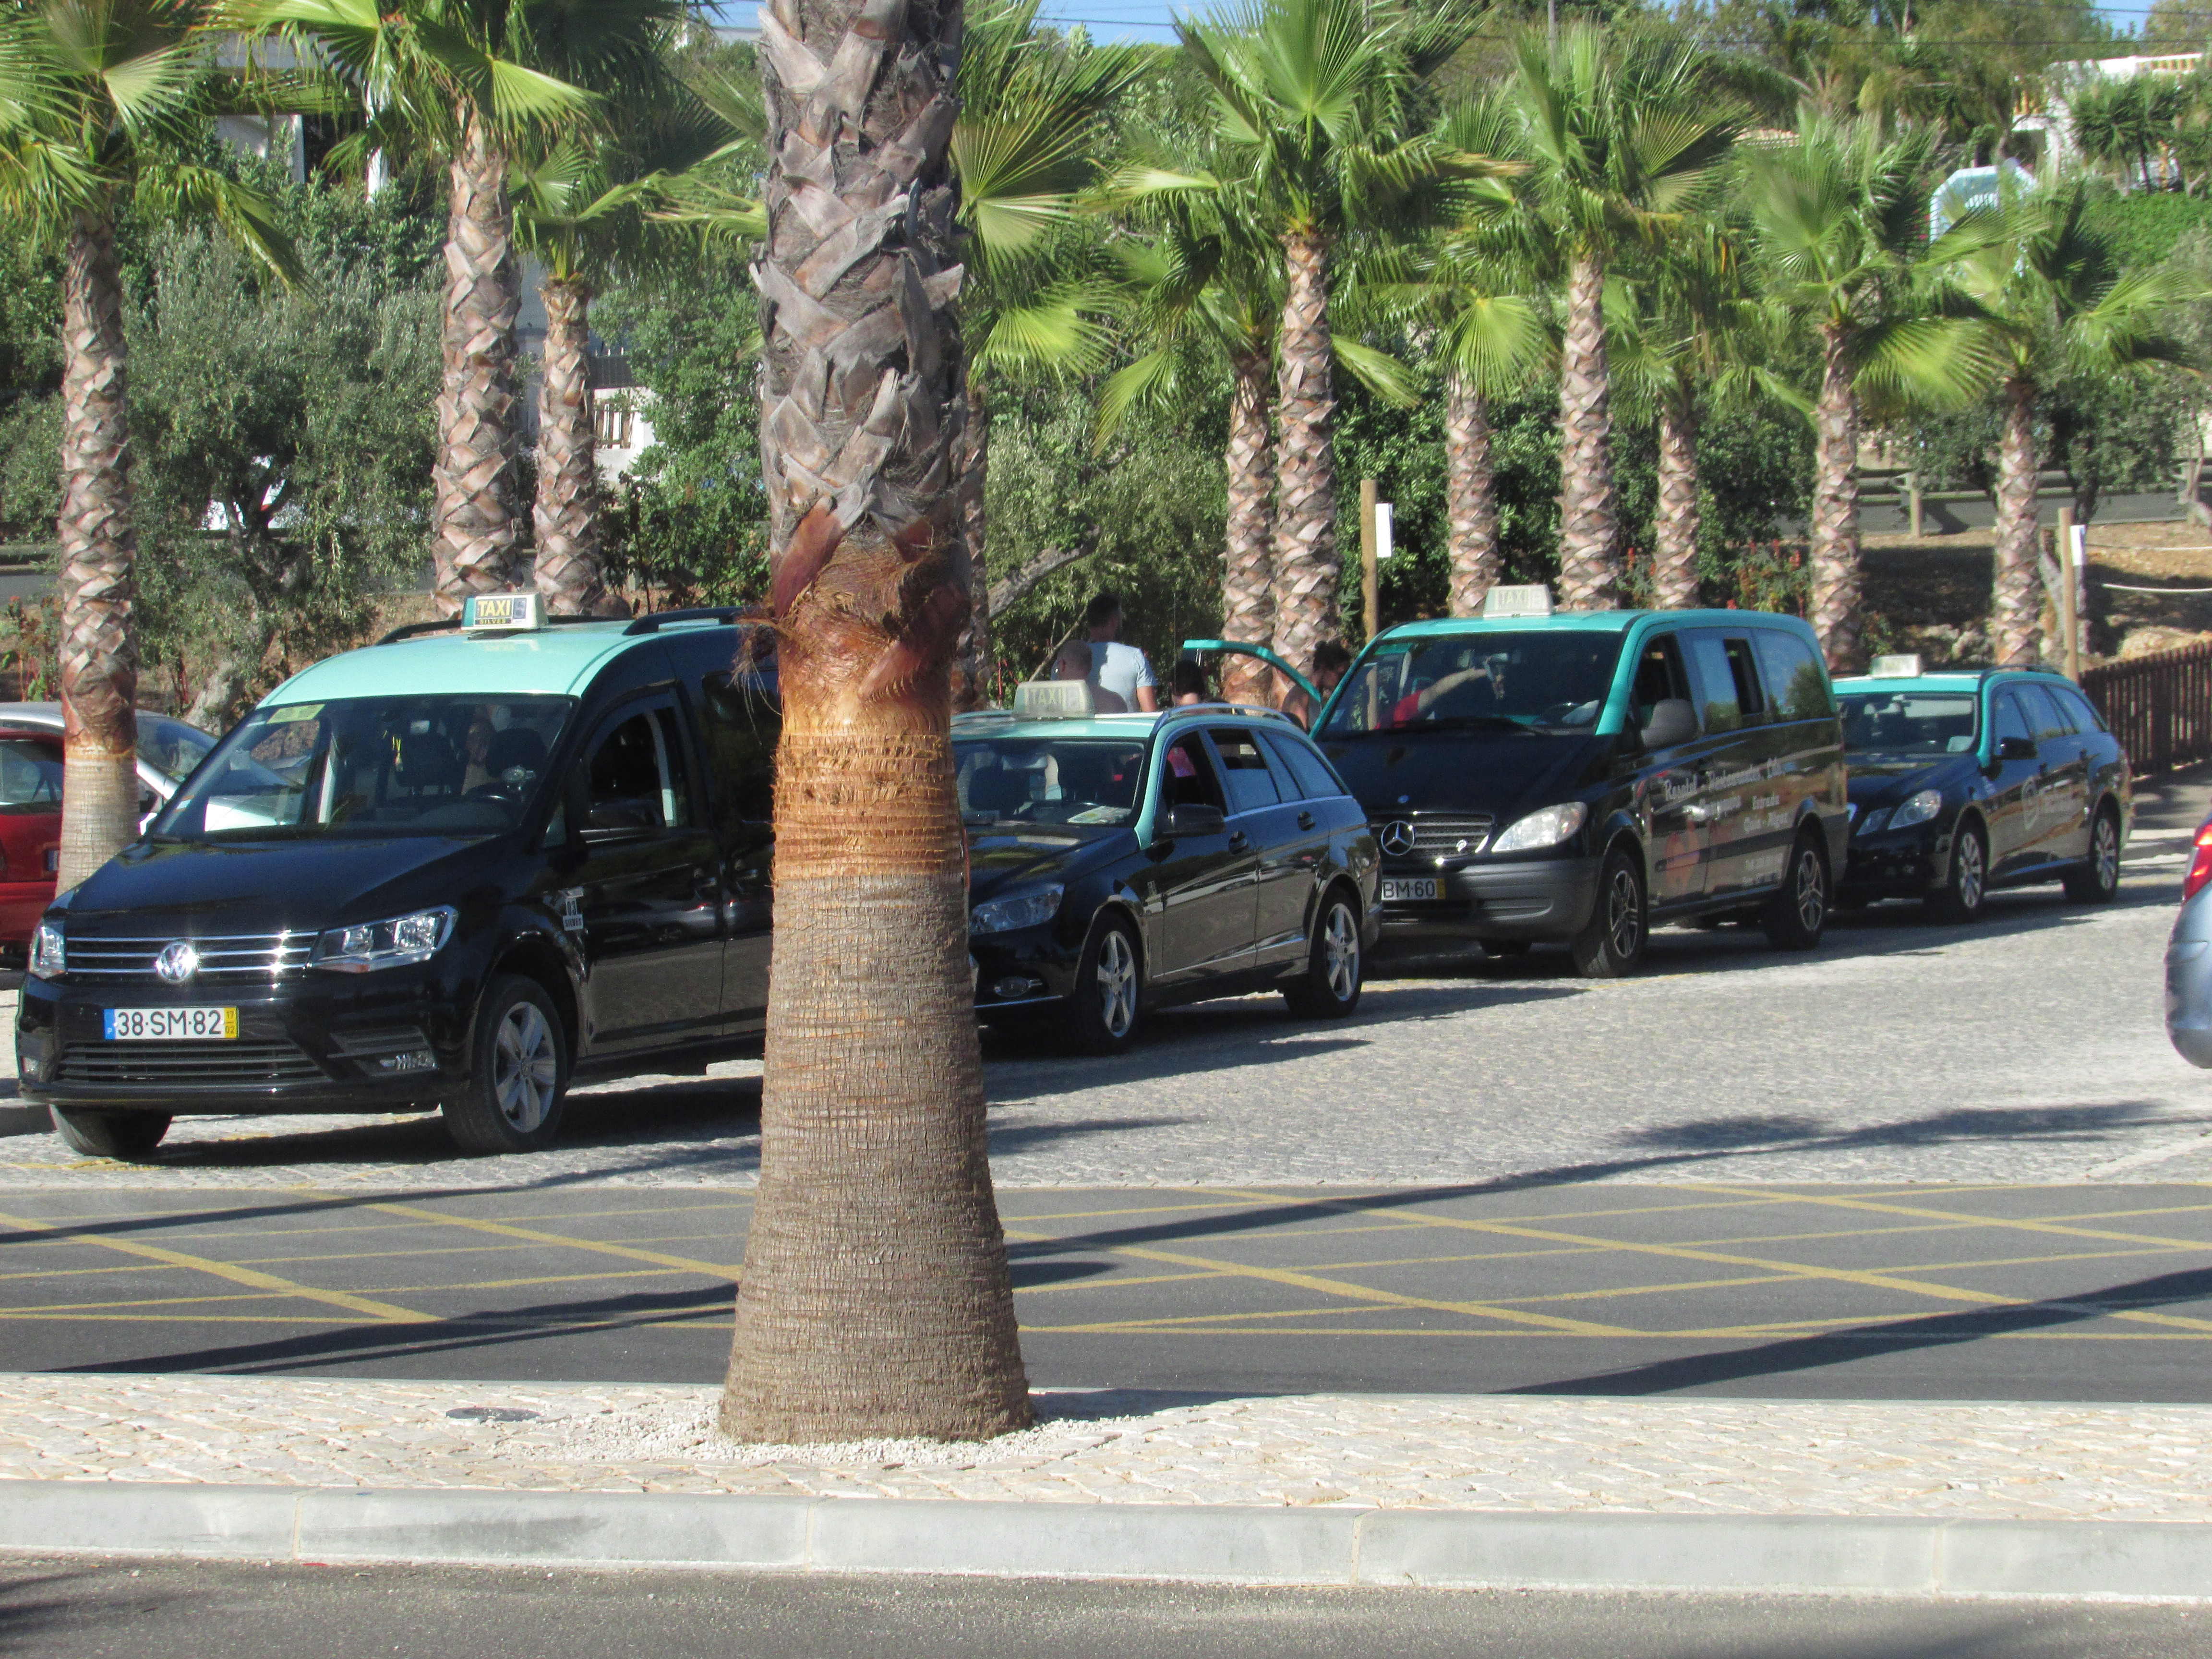 How to get around in Algarve, black taxi